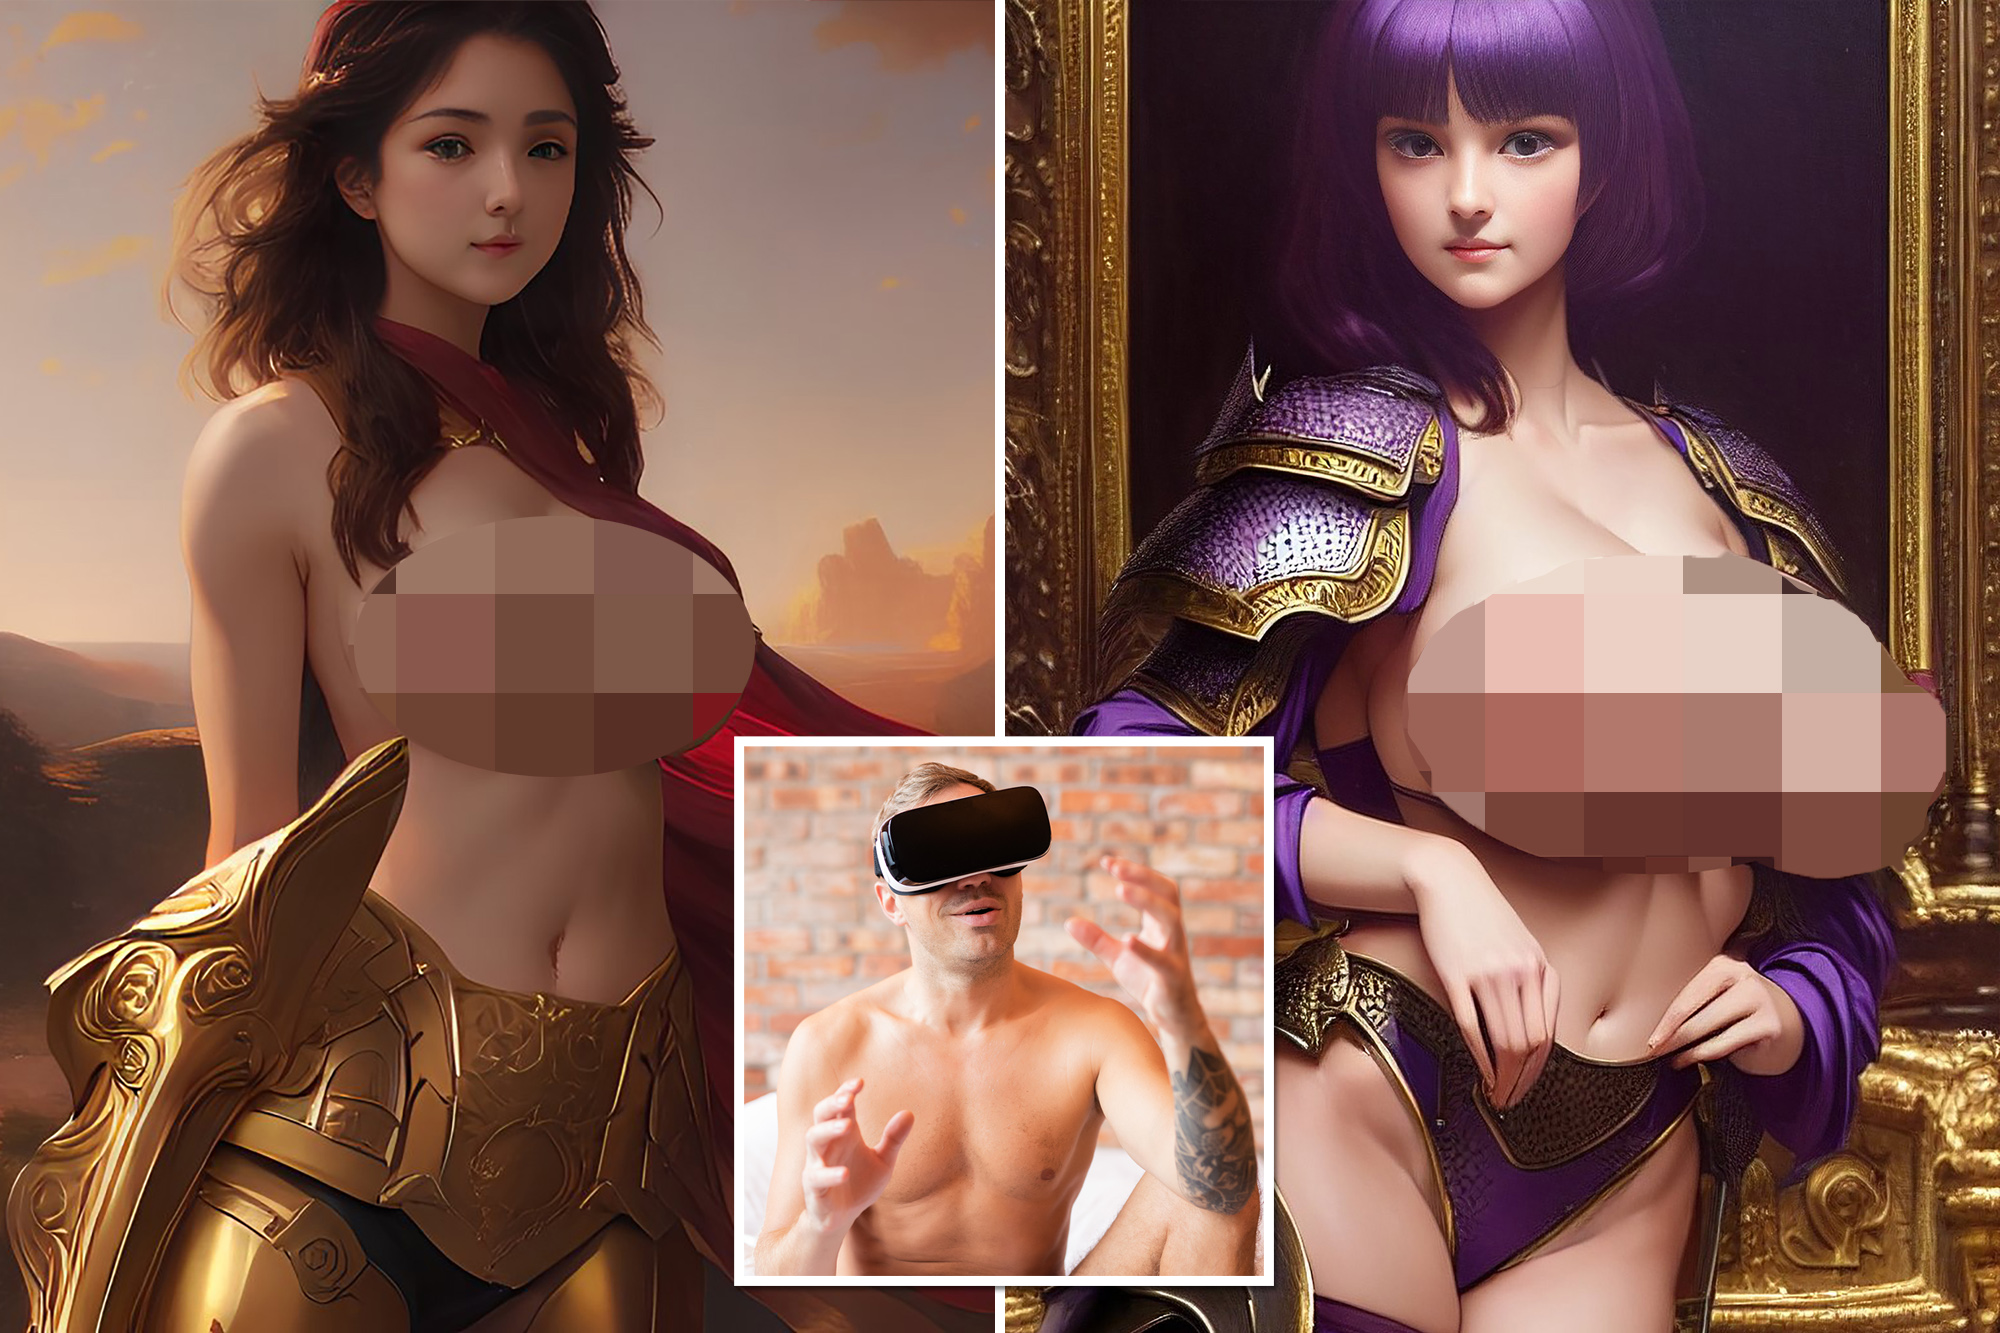 Get Better AI PORN GENERATOR Results By Following 3 Simple Steps